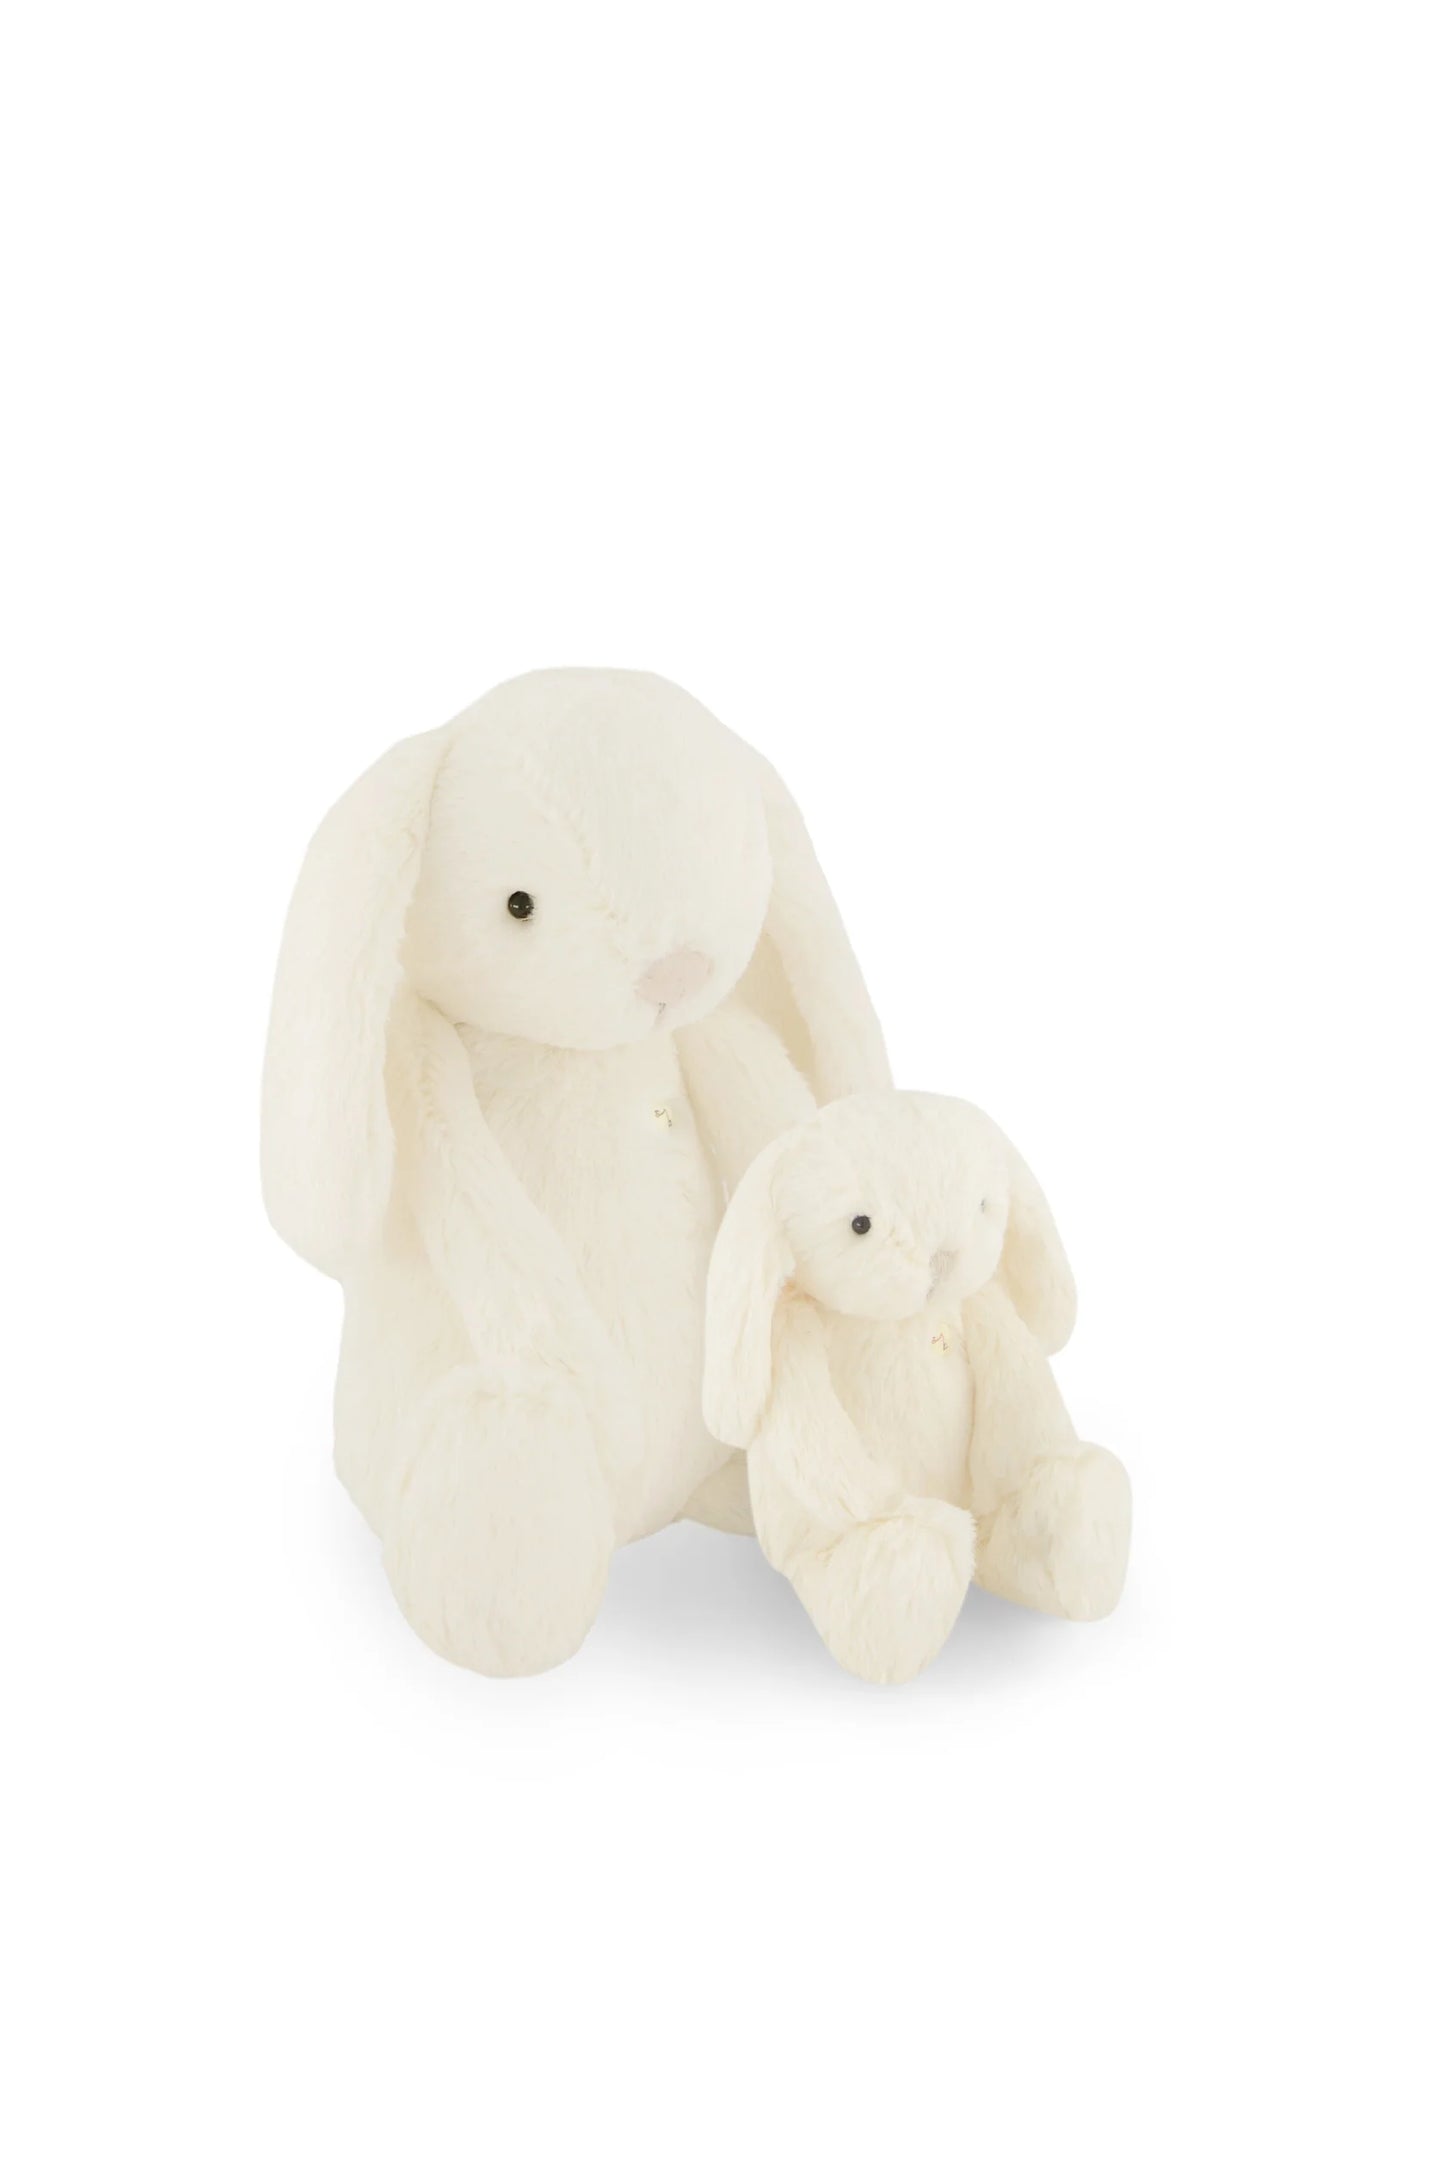 Jamie Kay Snuggle Bunnies  - Penelope the Bunny (Marshmallow - Size Options Available)